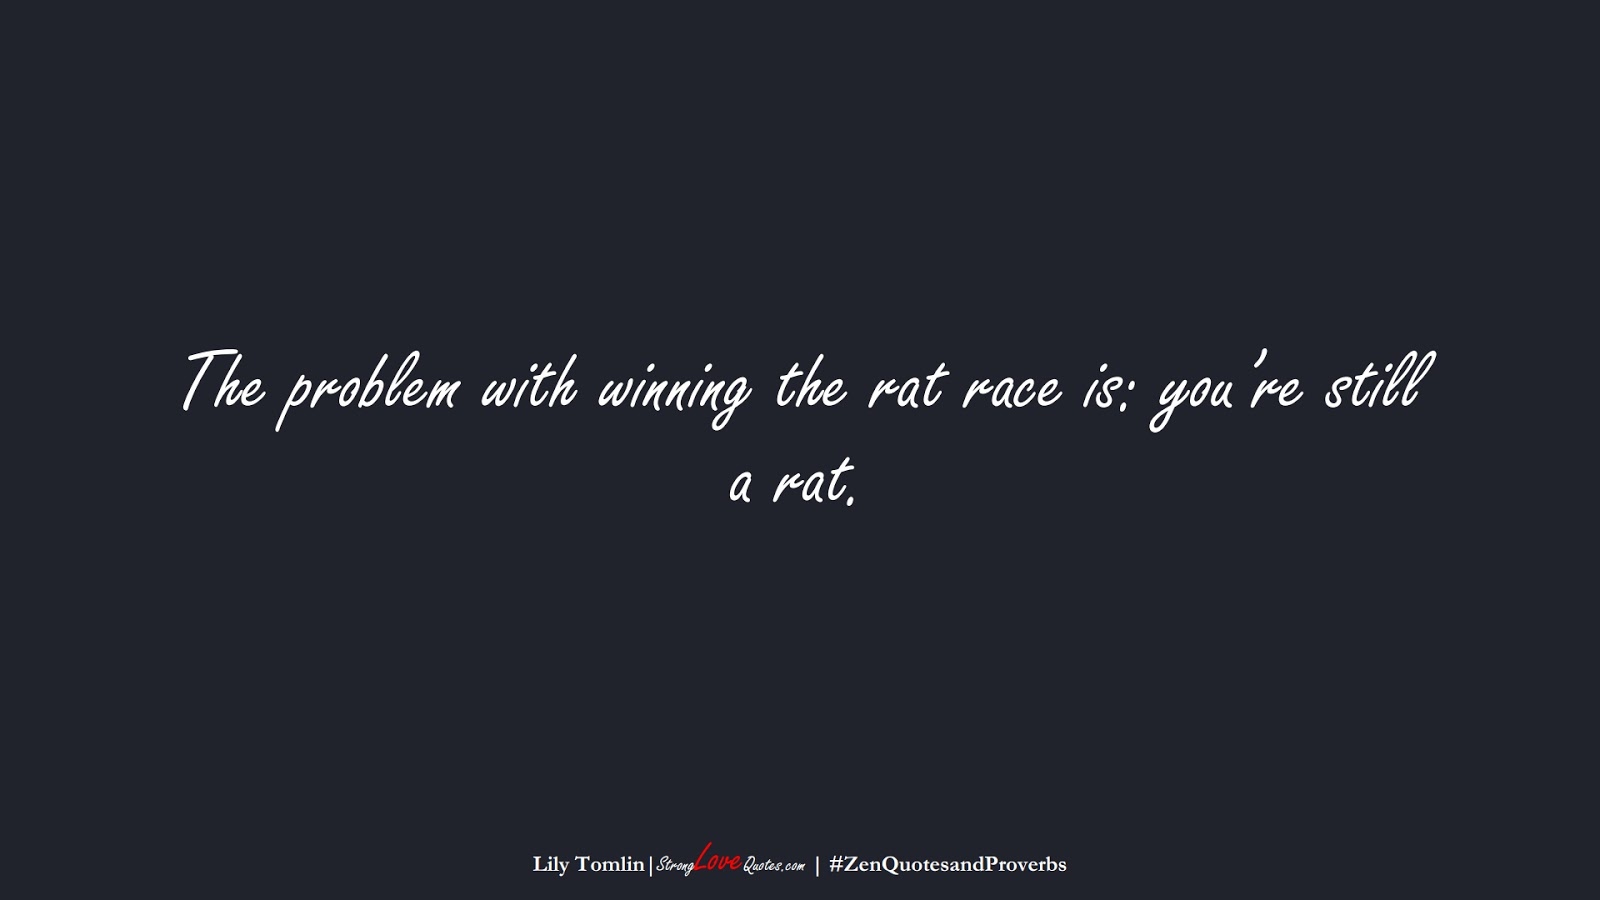 The problem with winning the rat race is: you’re still a rat. (Lily Tomlin);  #ZenQuotesandProverbs